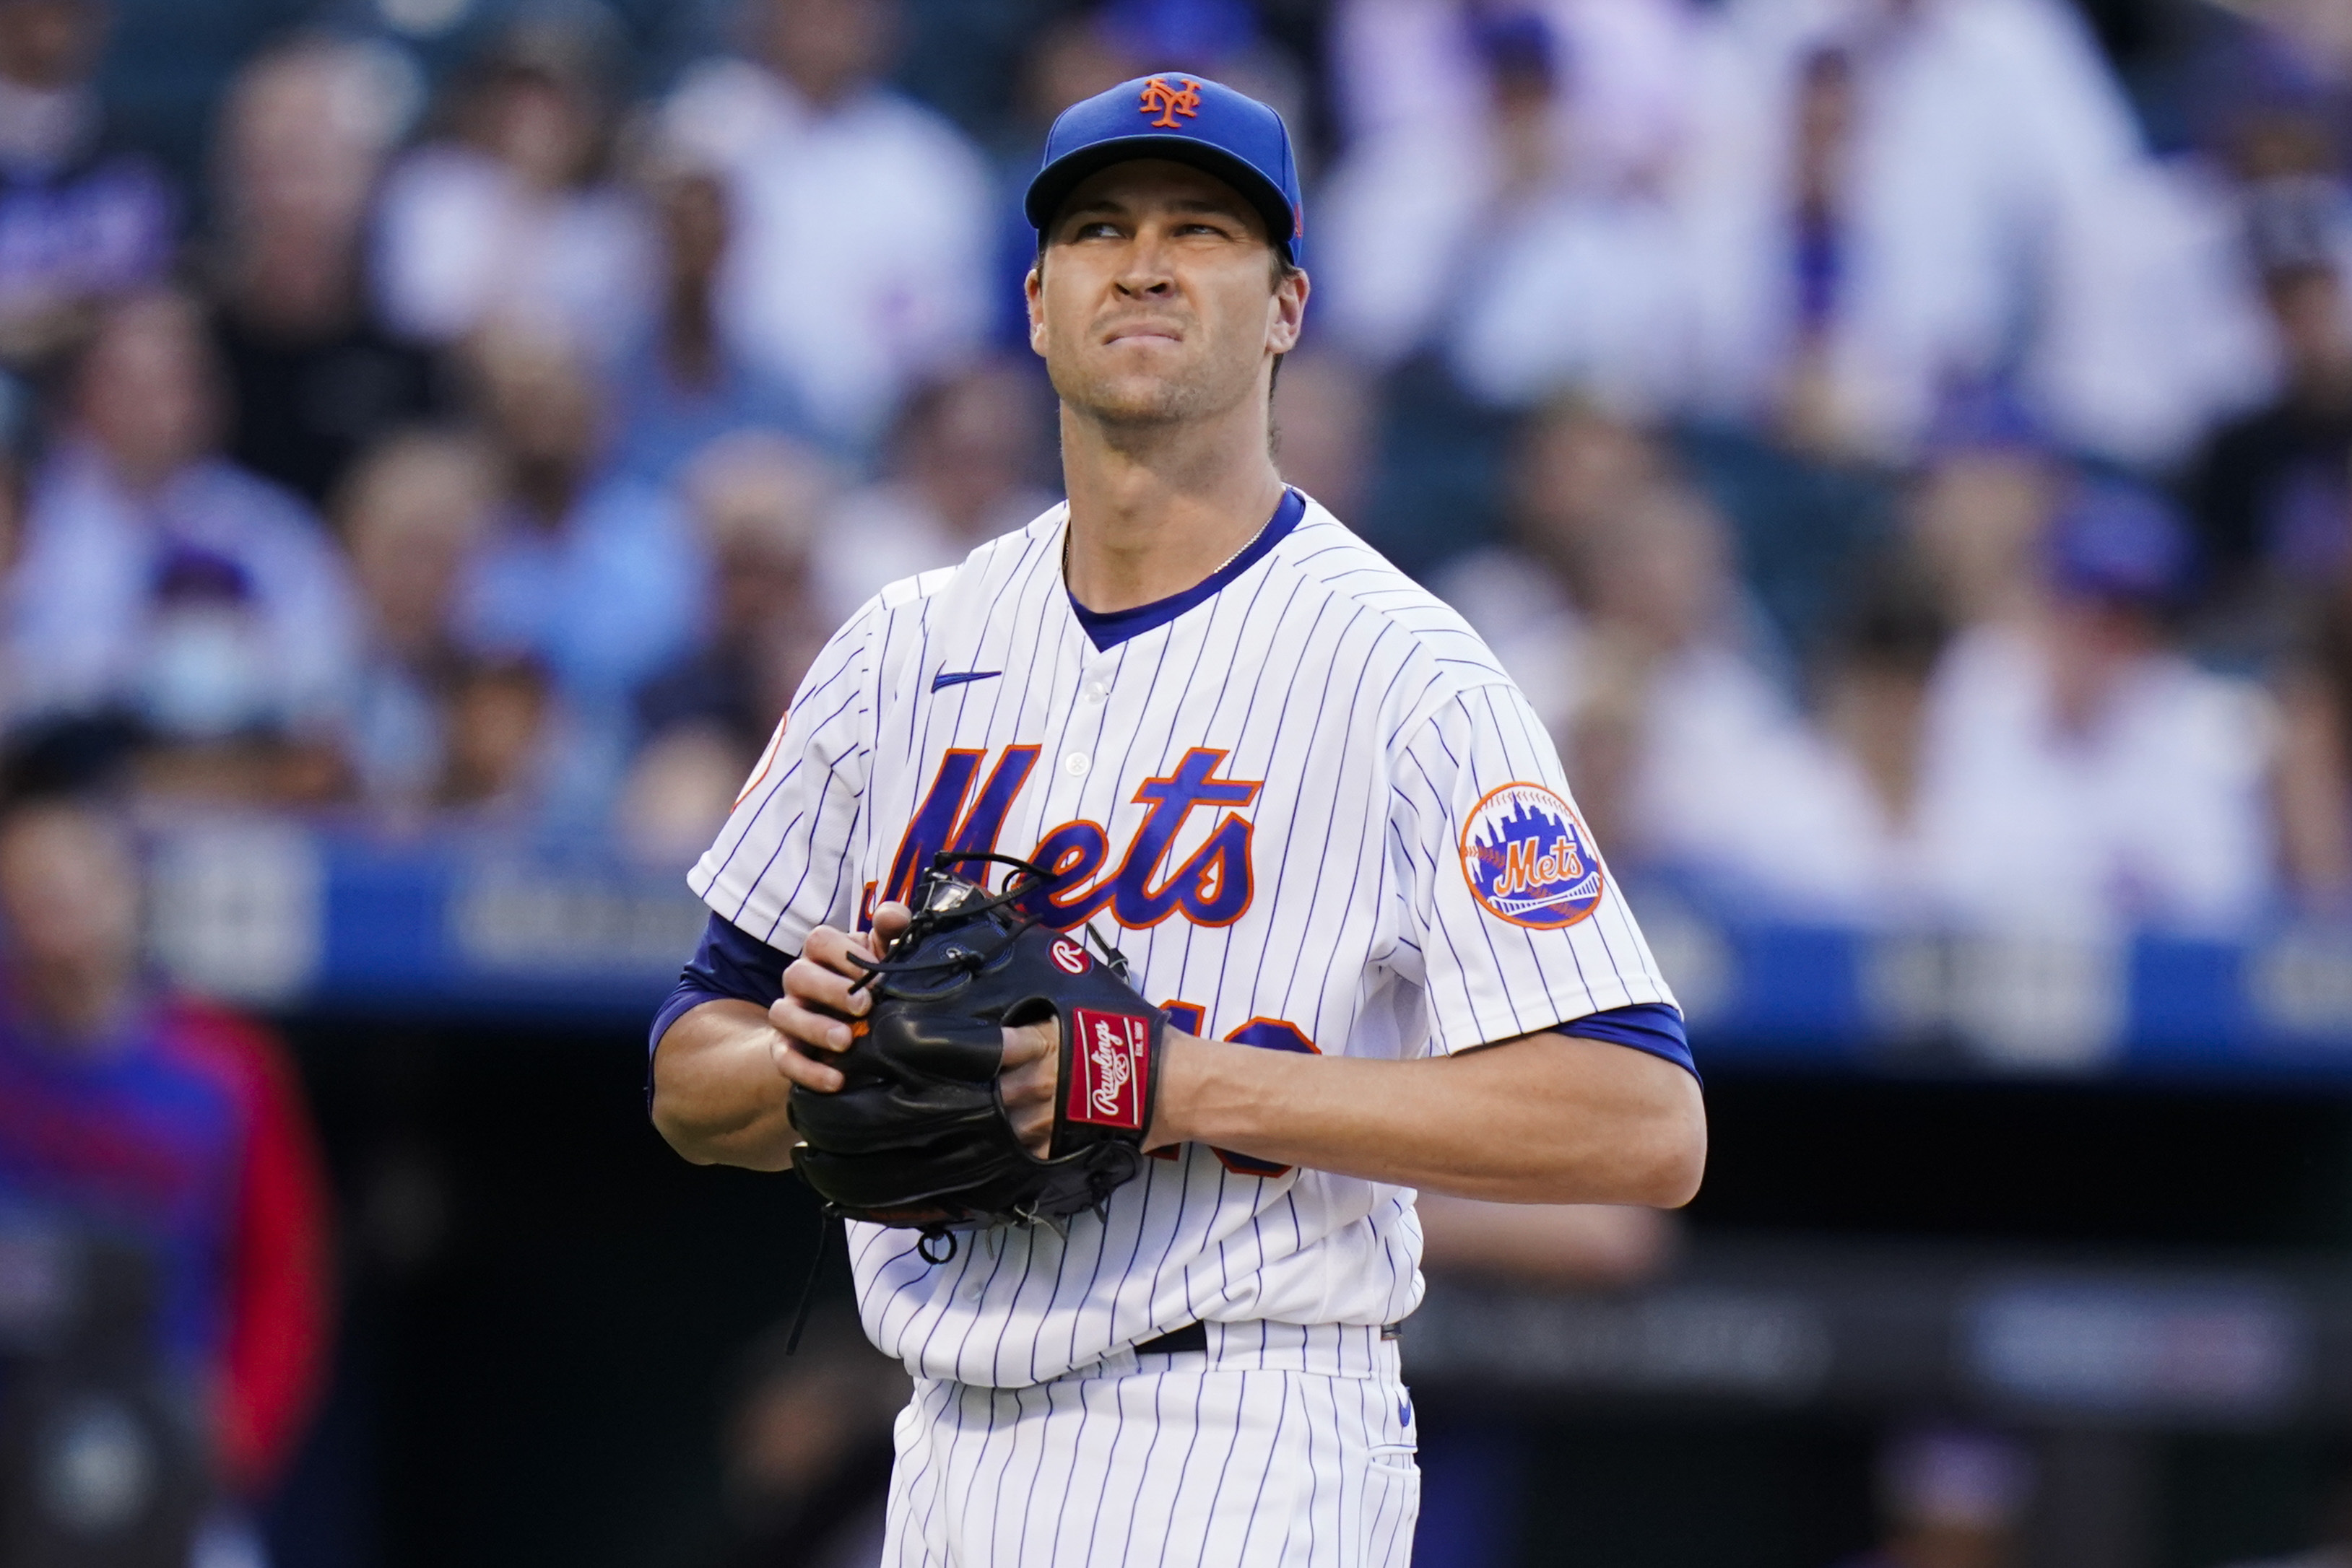 Jacob deGrom leaves game early with right shoulder soreness - Amazin' Avenue